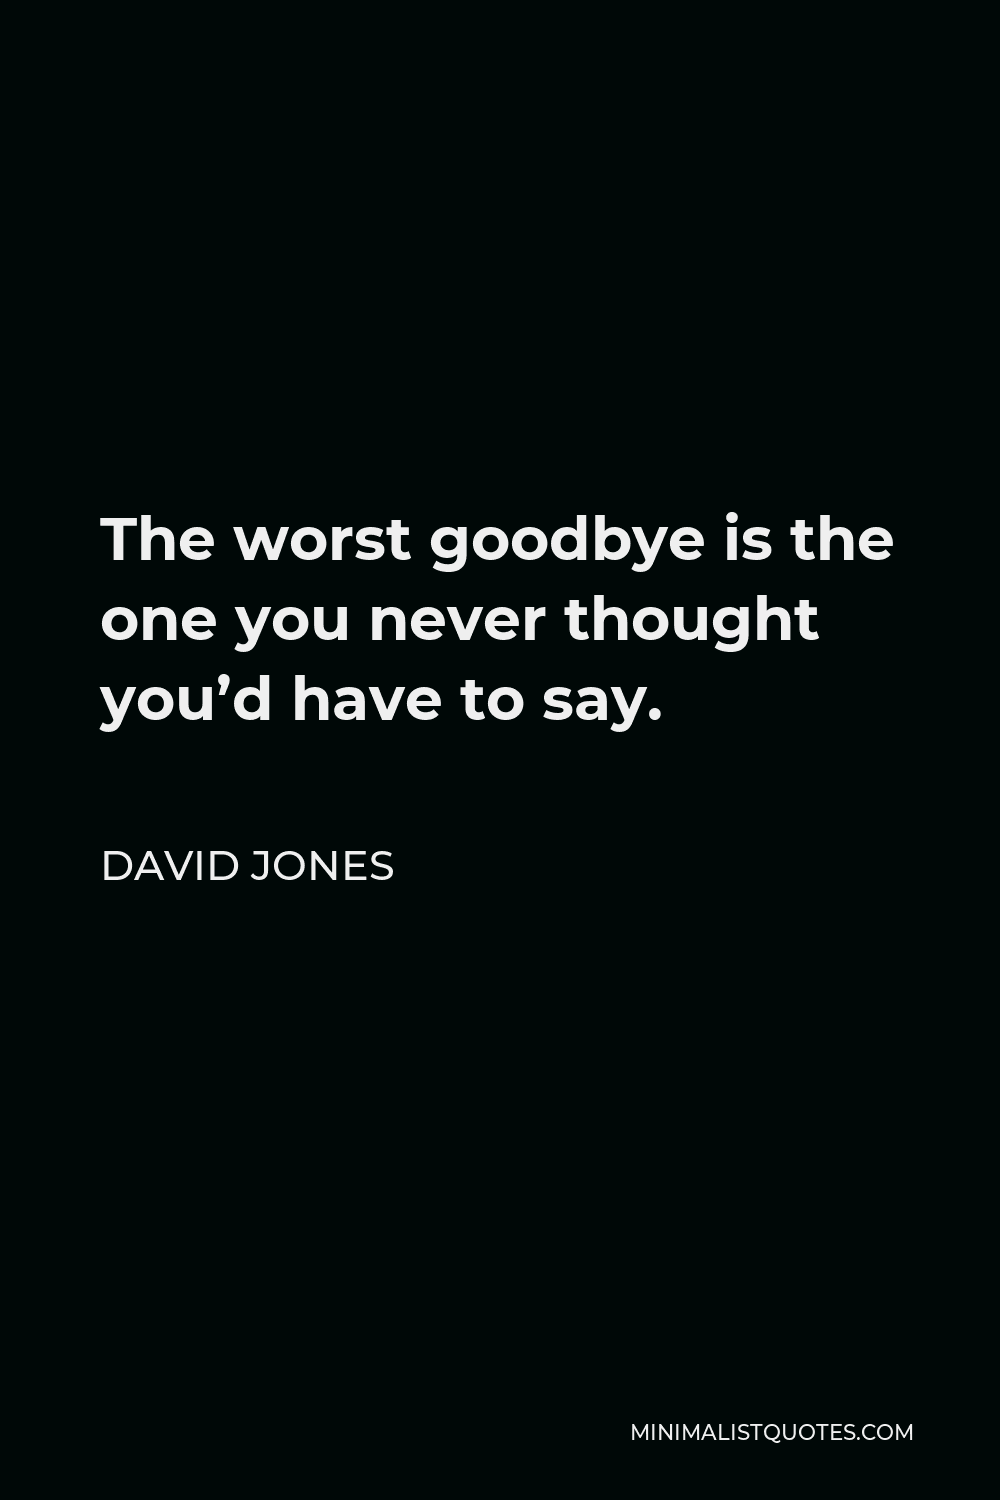 David Jones Quote - The worst goodbye is the one you never thought you’d have to say.